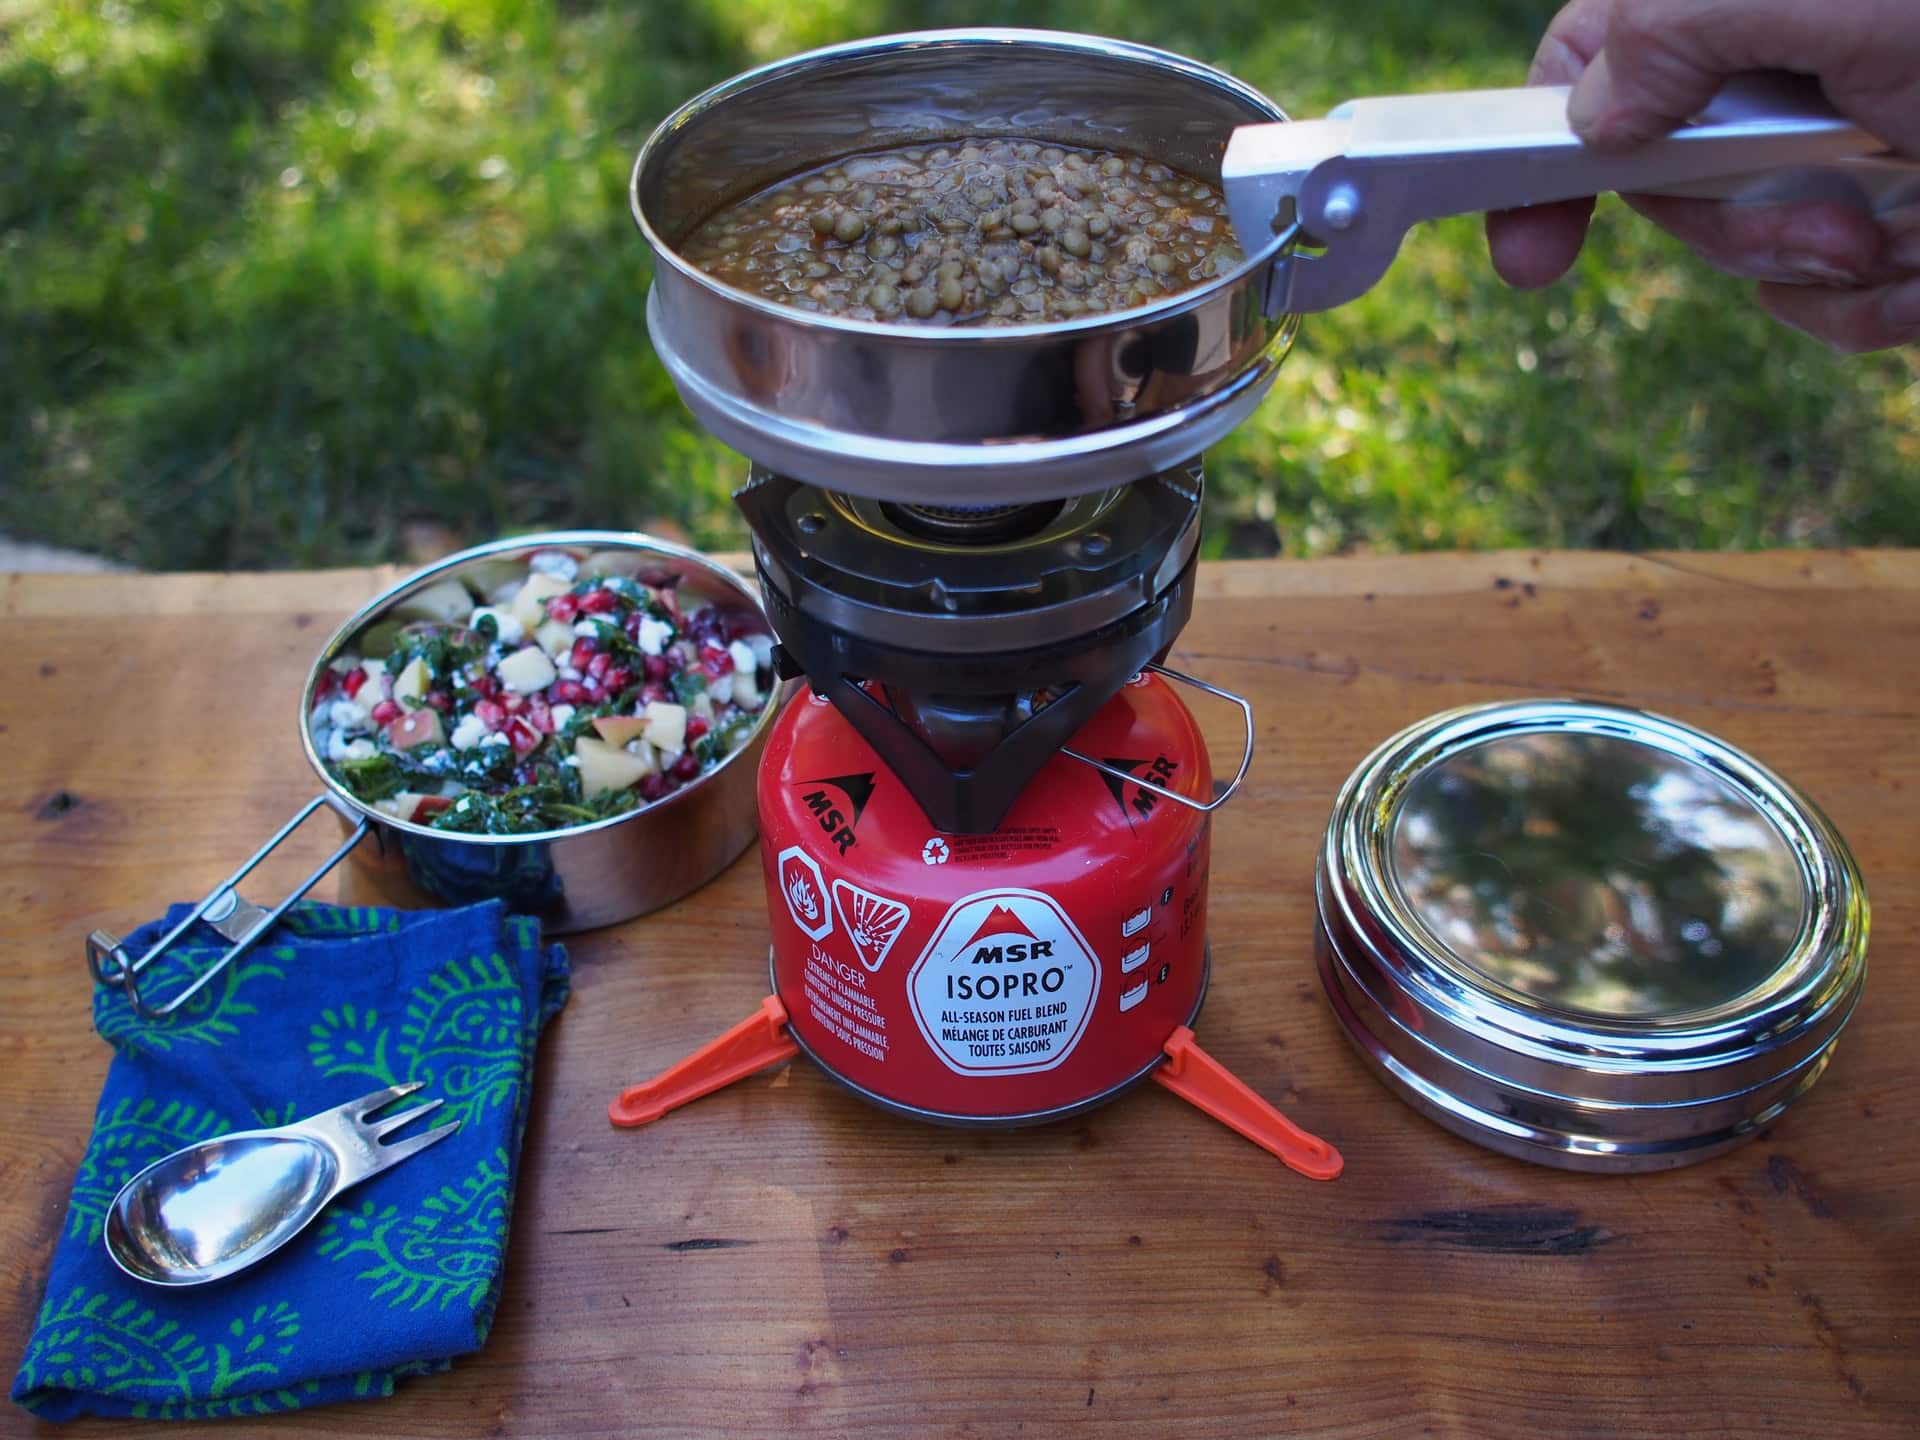 How To Make Dehydrated Food For Camping